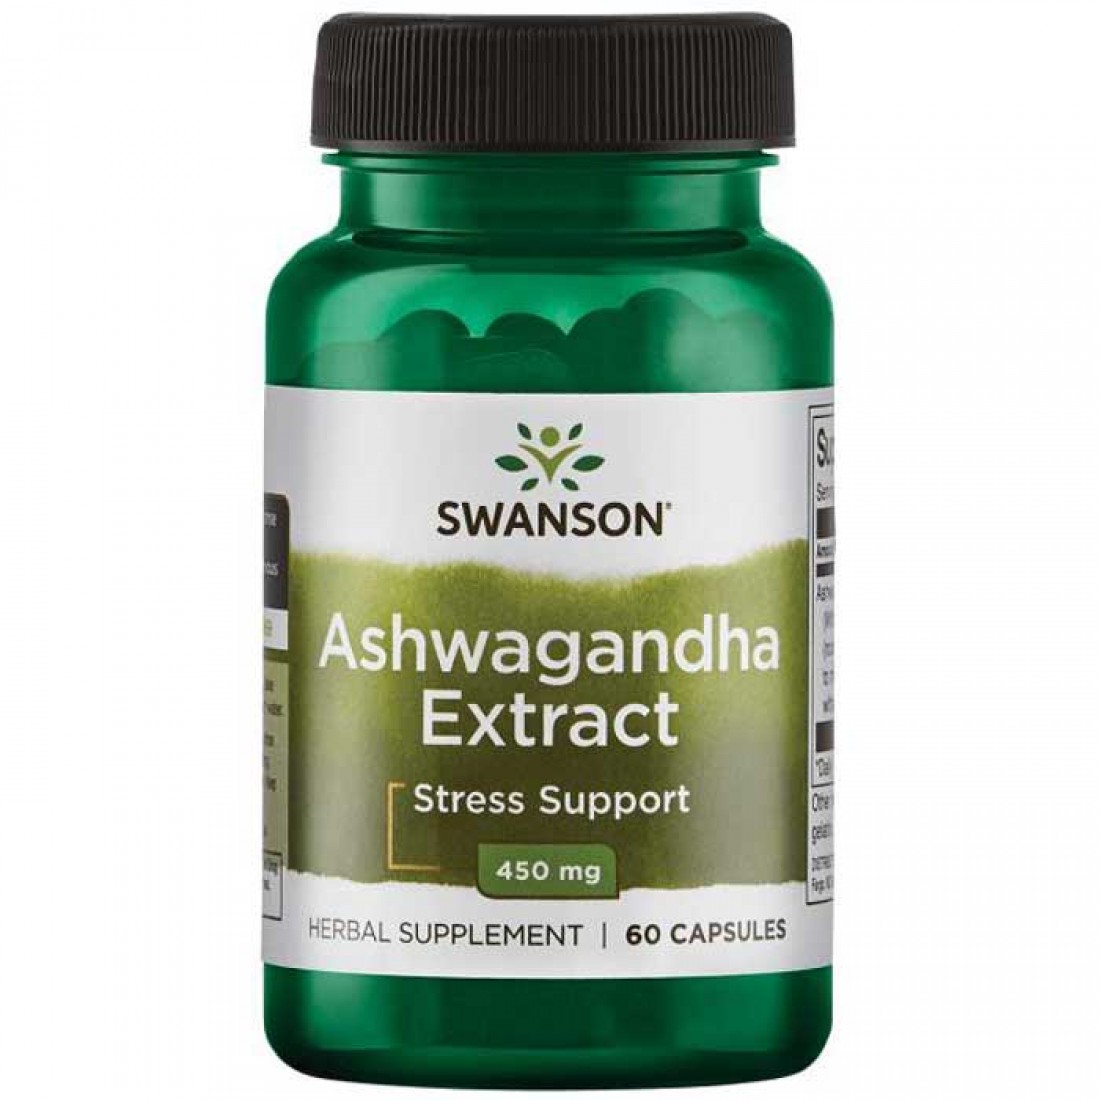 Ashwagandha Extract Mg Caps Swanson Megaproteinstore Gr